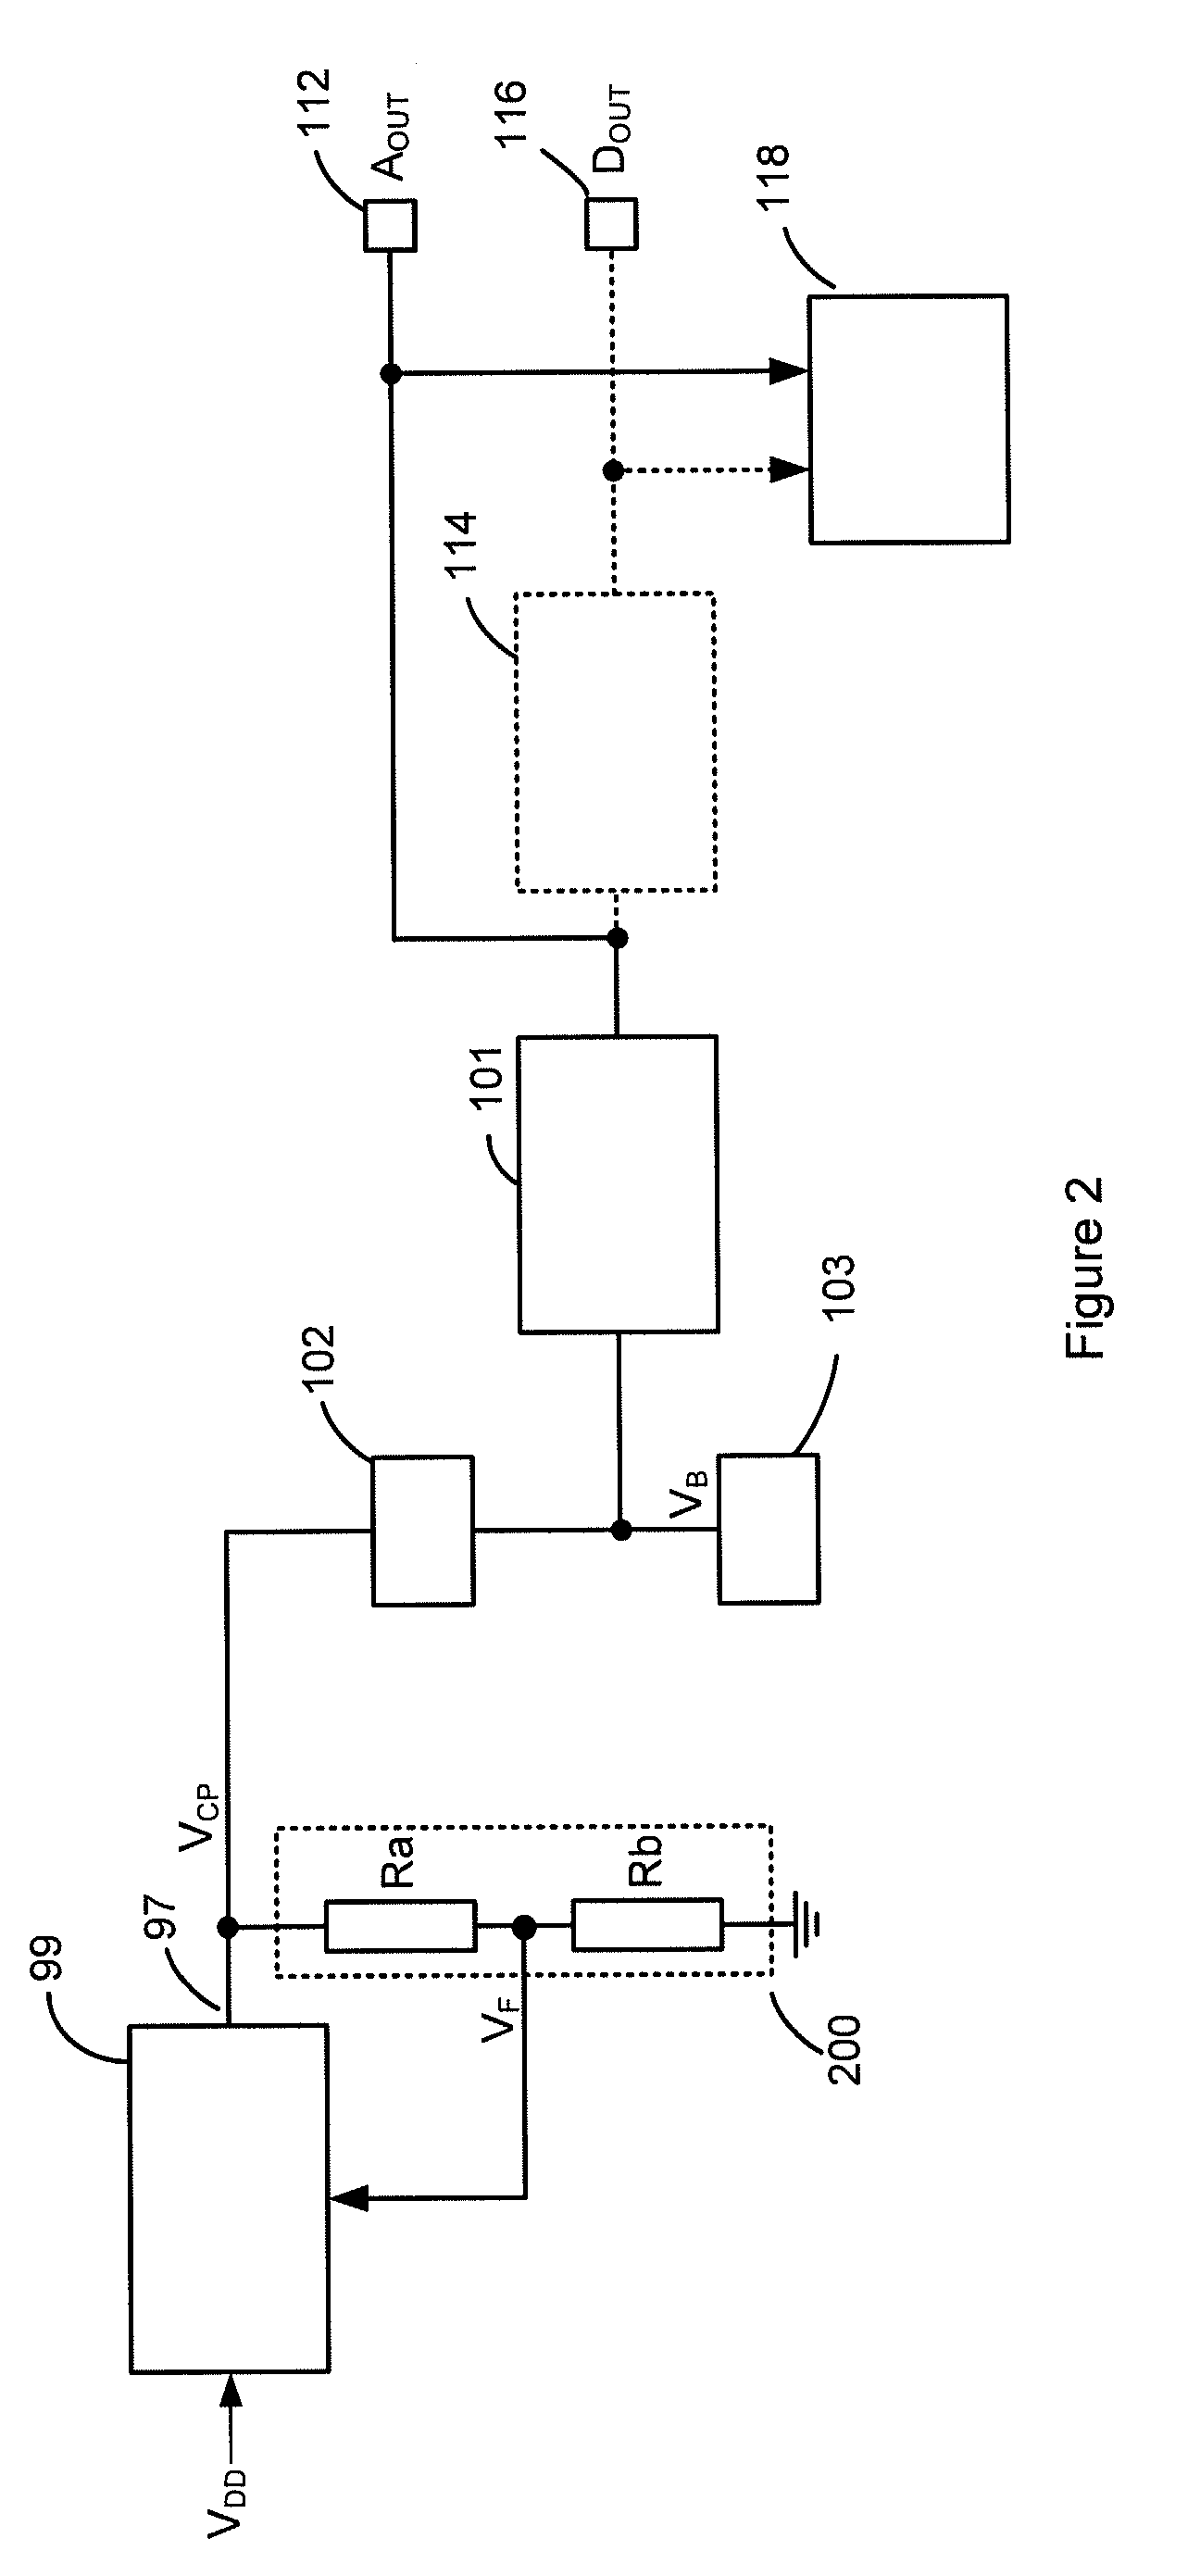 Apparatus and method for biasing a transducer